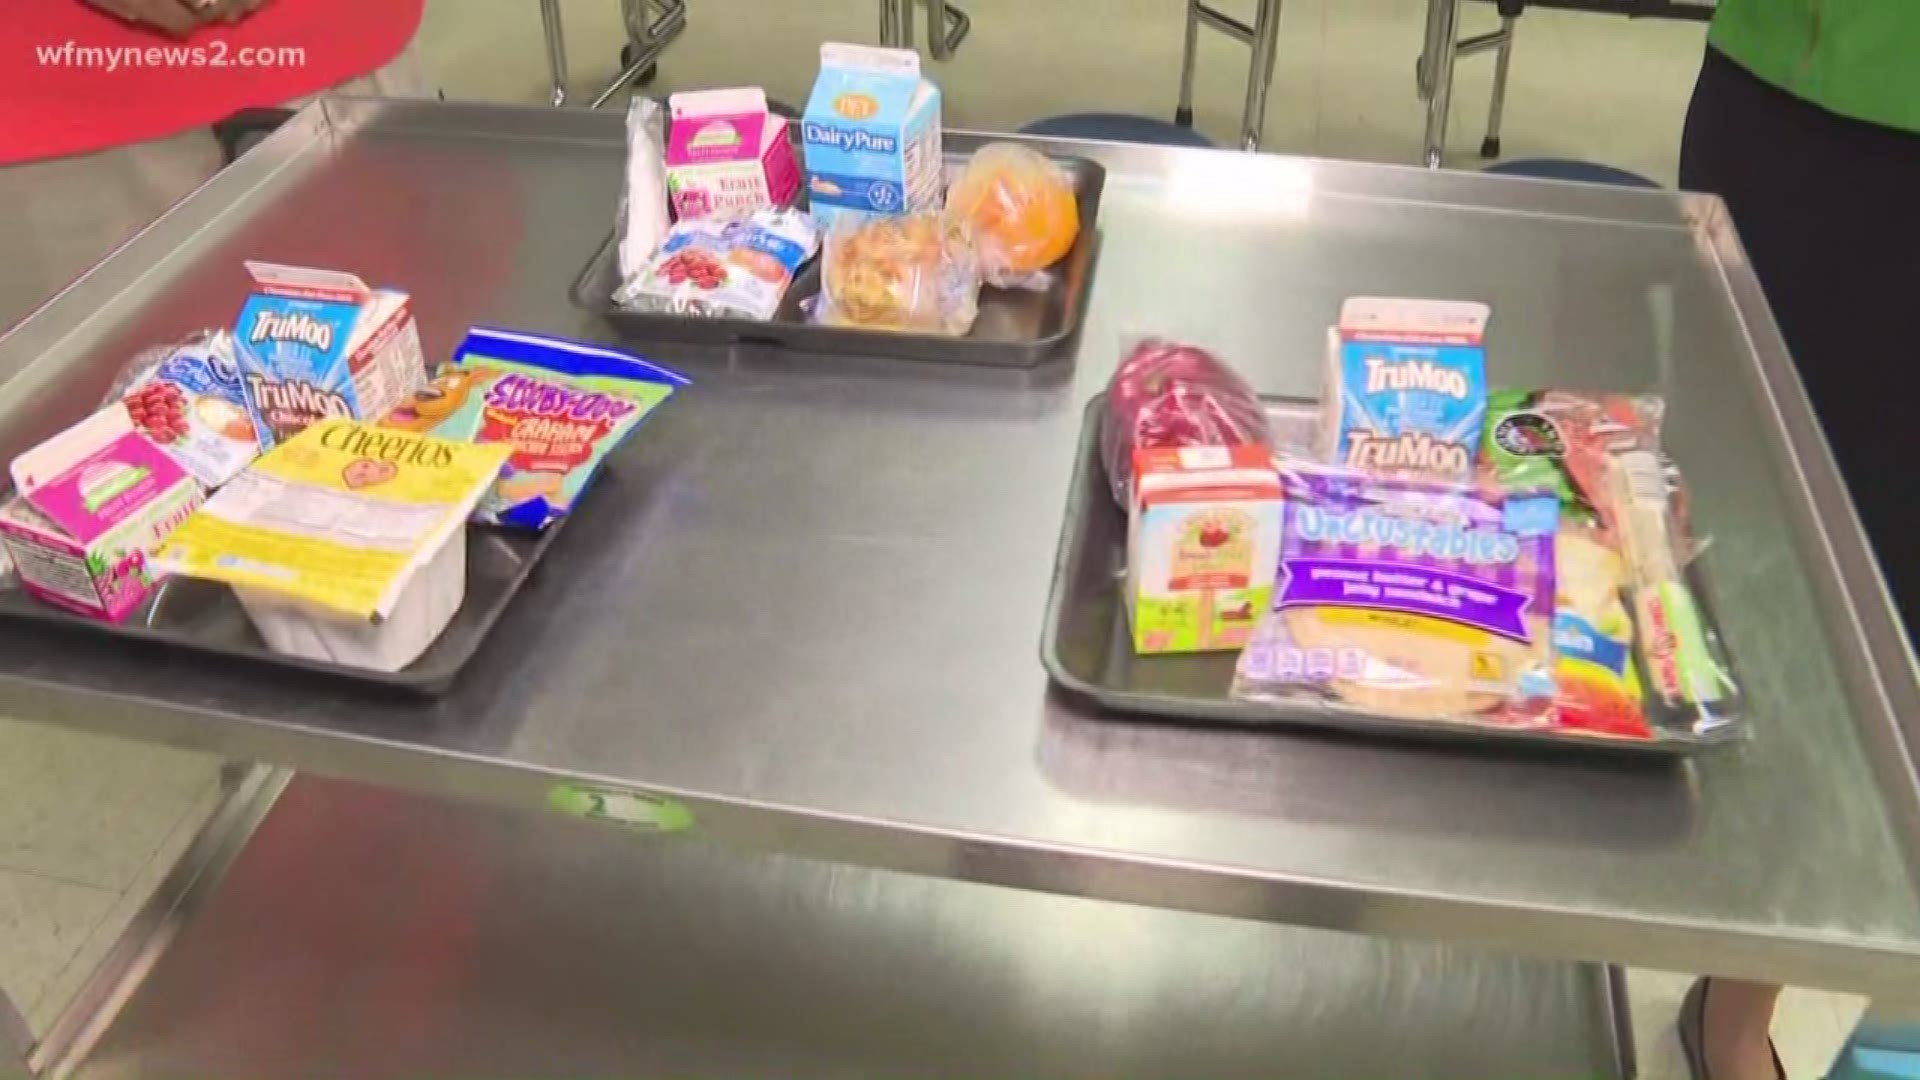 The City of Greensboro is partnering with Guilford County Schools to provide free meals for children over the summer.